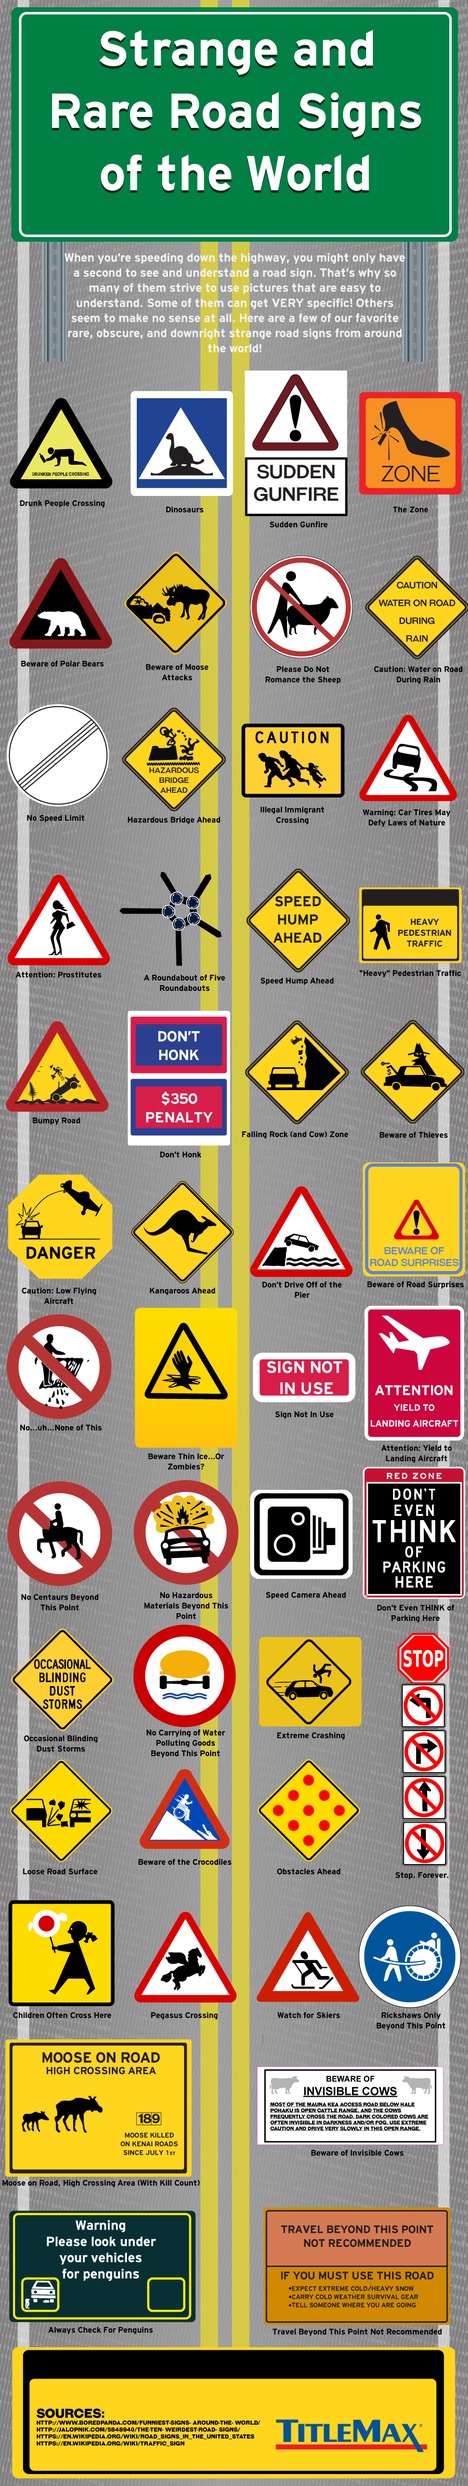 Strange and Rare Road Signs of the World